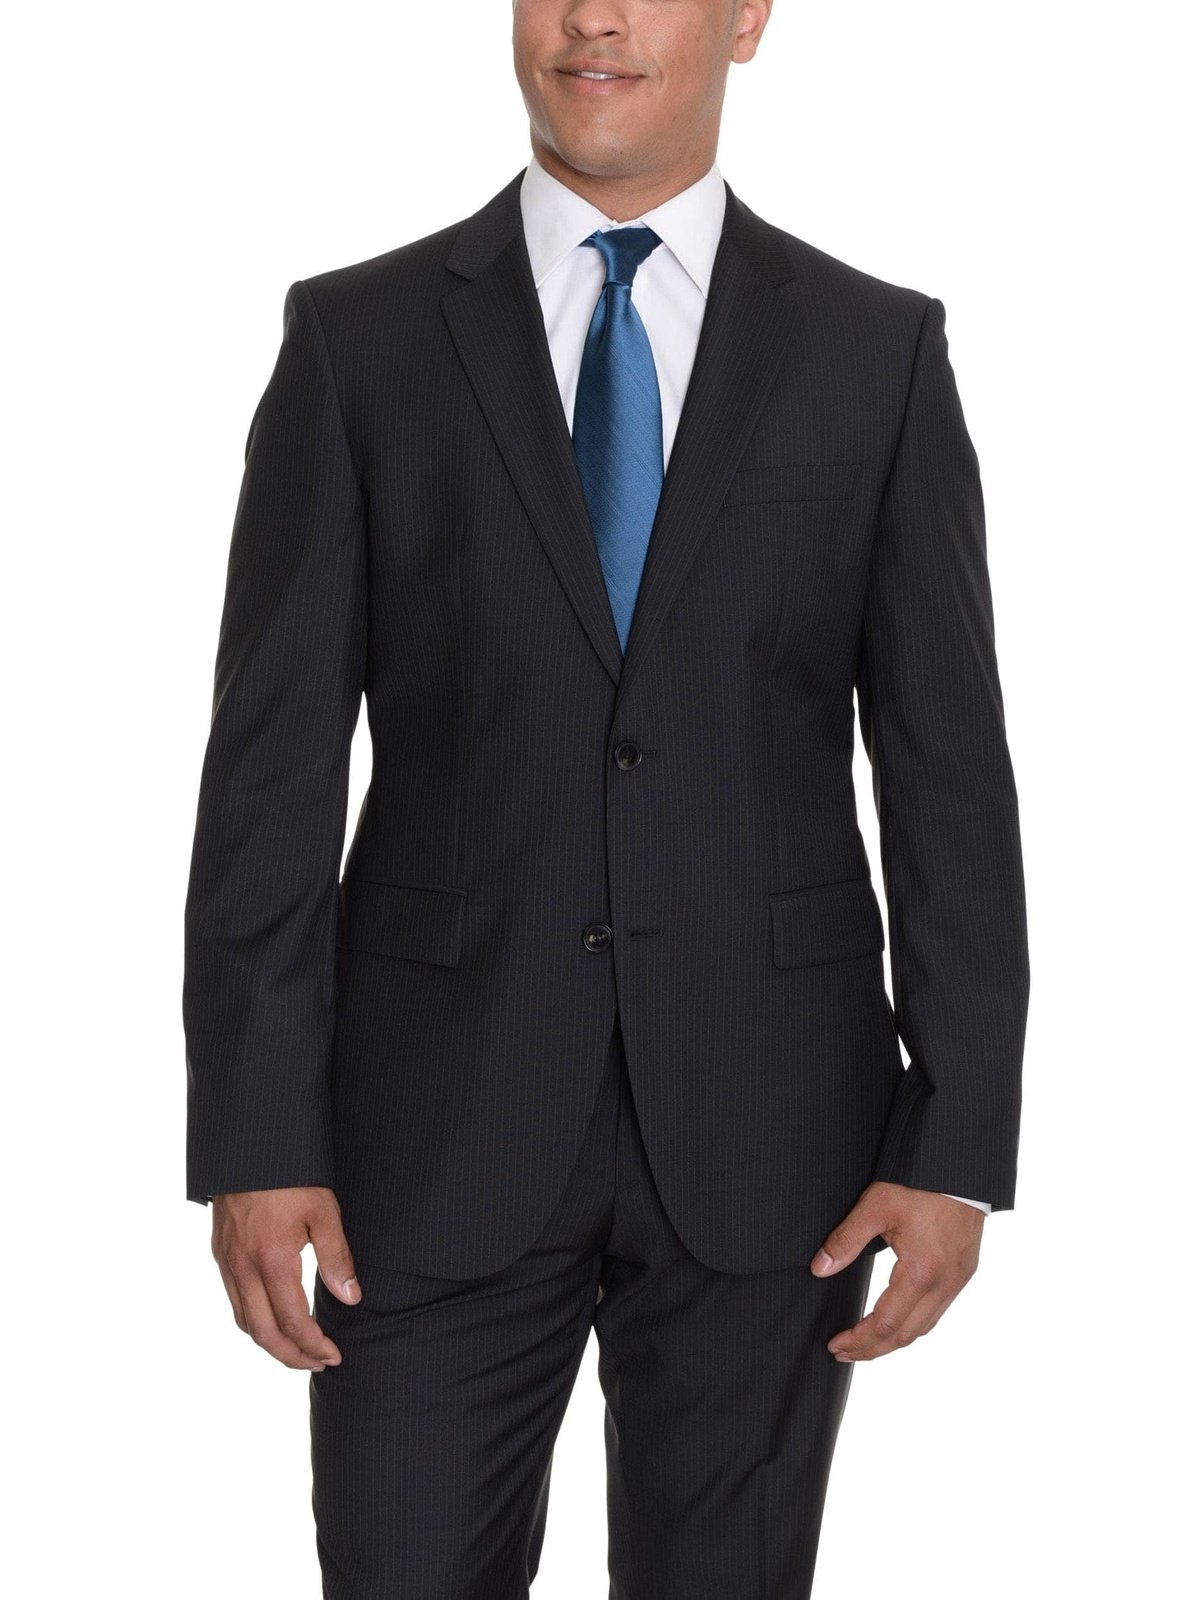 HUGO BOSS TWO PIECE SUITS HUGO BOSS The Grand/Central Black Striped Two Button Wool Suit